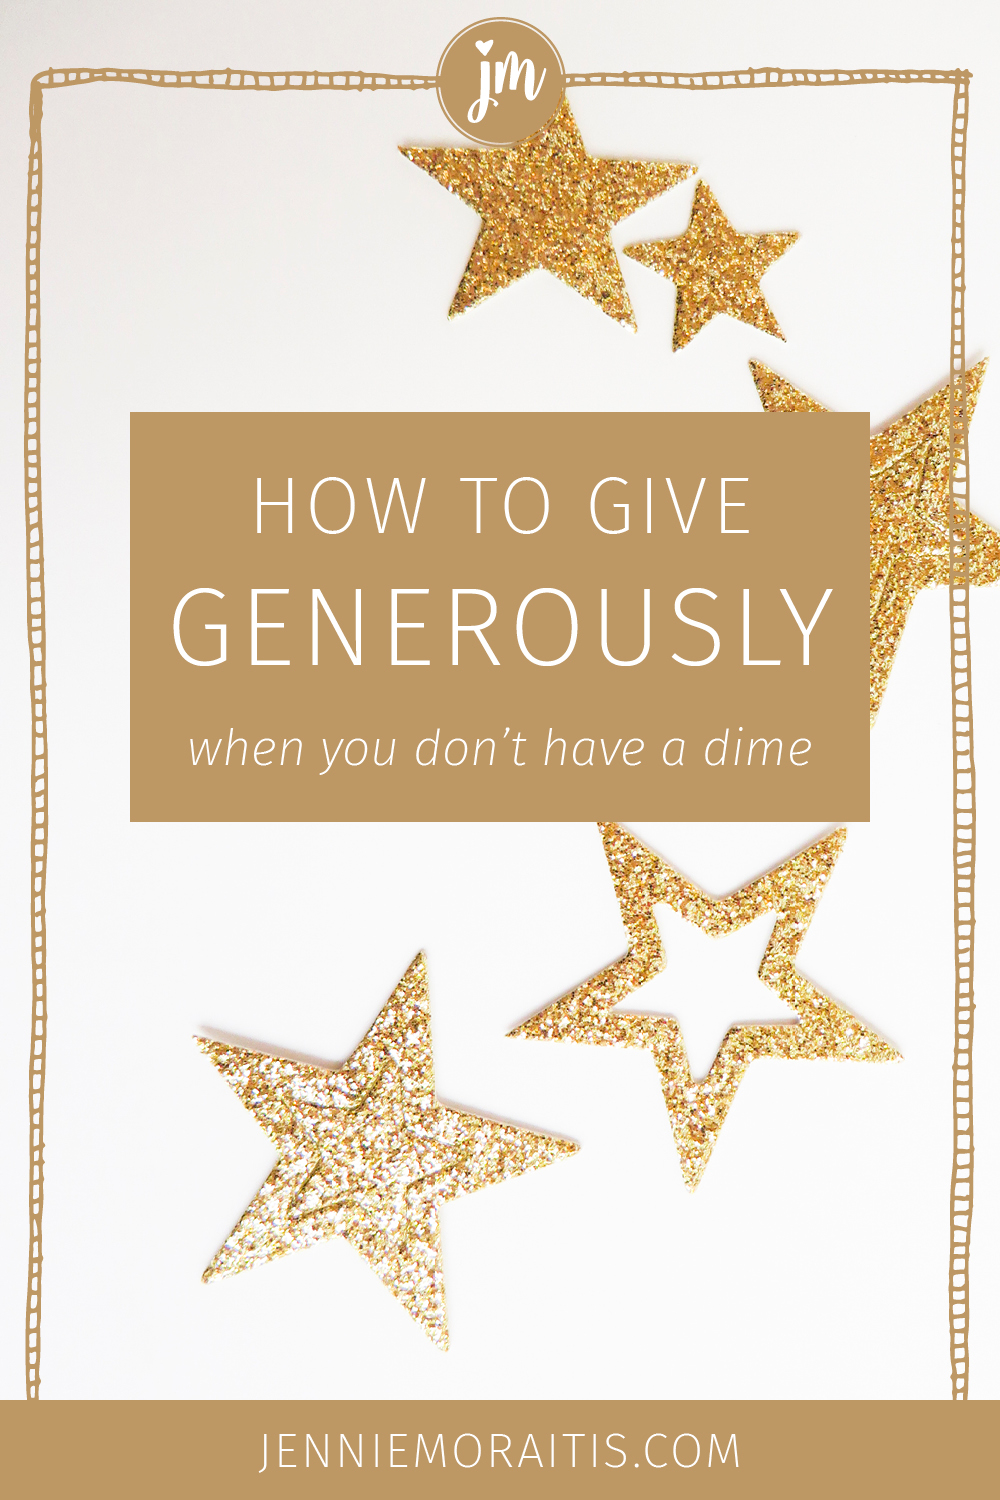 17 ways to give thoughtful gifts to your boyfriend, friends, and family even if you don't have a lot of money at the moment. A lot of these are creative and DIY gift ideas that will be so appreciated!